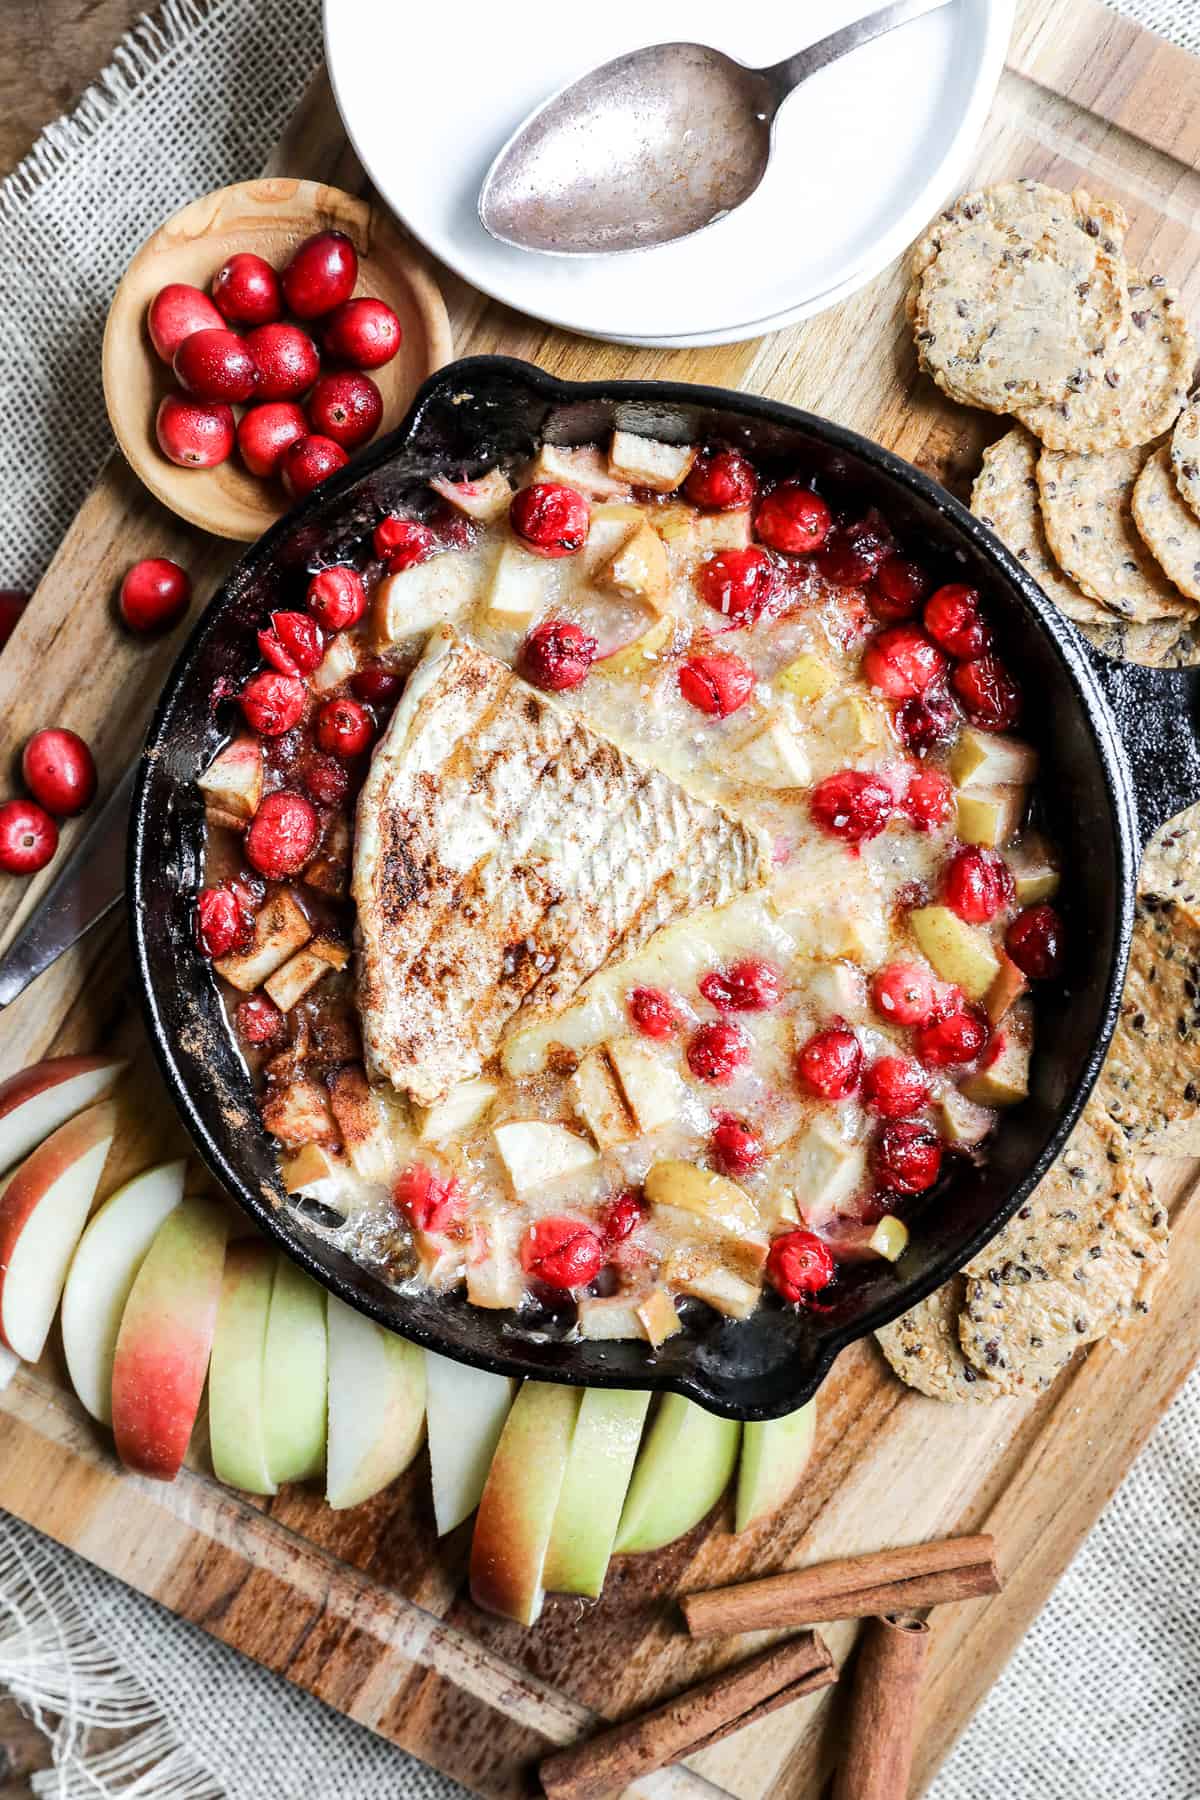 skillet filled with baked brie and cranberries and apples